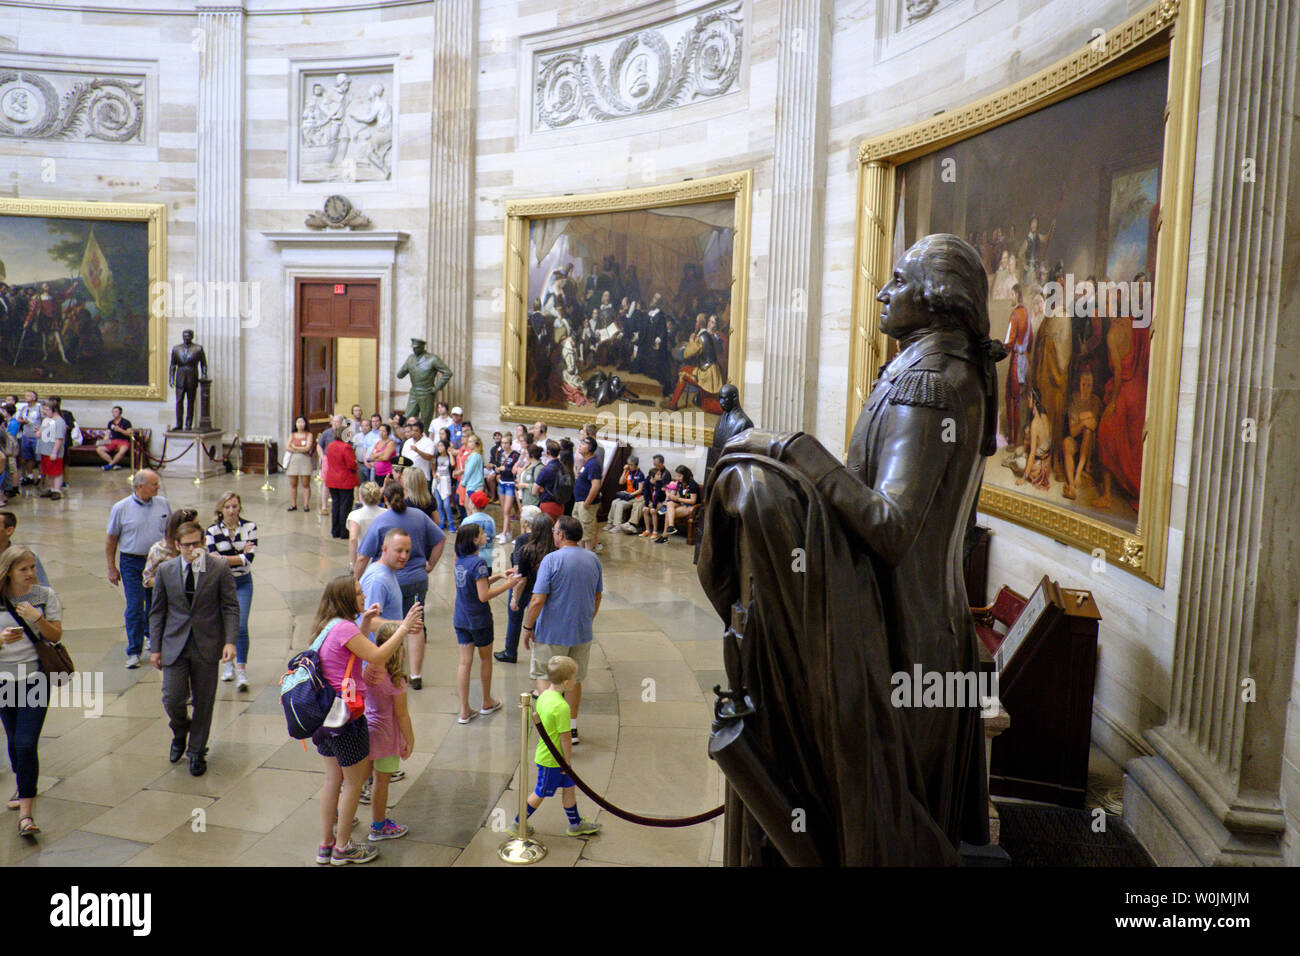 A statue of George Washington, leader of the Continental Army in the American Revolution, and first U.S. president, stands in the U.S. Capitol Rotunda on August 17, 2017 in Washington, DC, A nationwide debate is underway concerning the removal of statues, monuments and historical markers that memorialize the Confederacy.   Photo by Pete Marovich/UPI Stock Photo